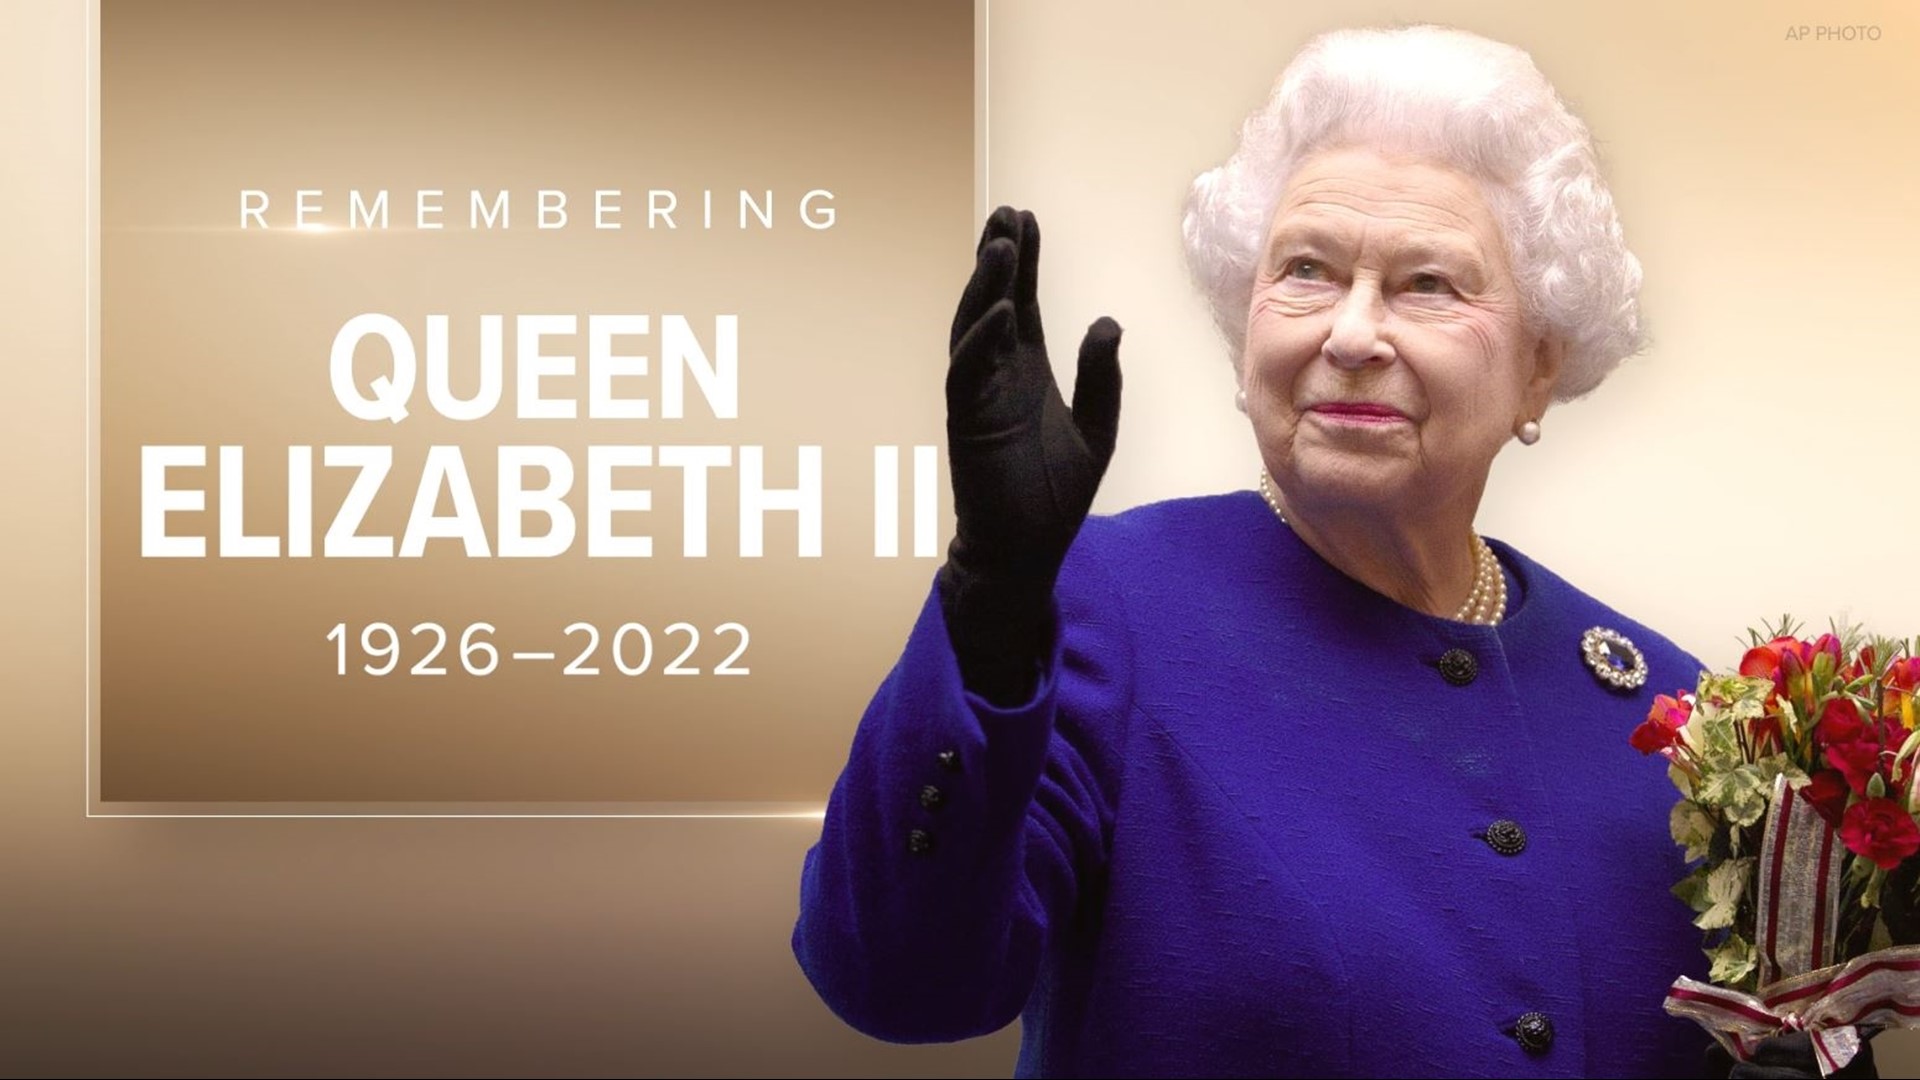 Death of Queen Elizabeth II: Where is Charles now king and what is